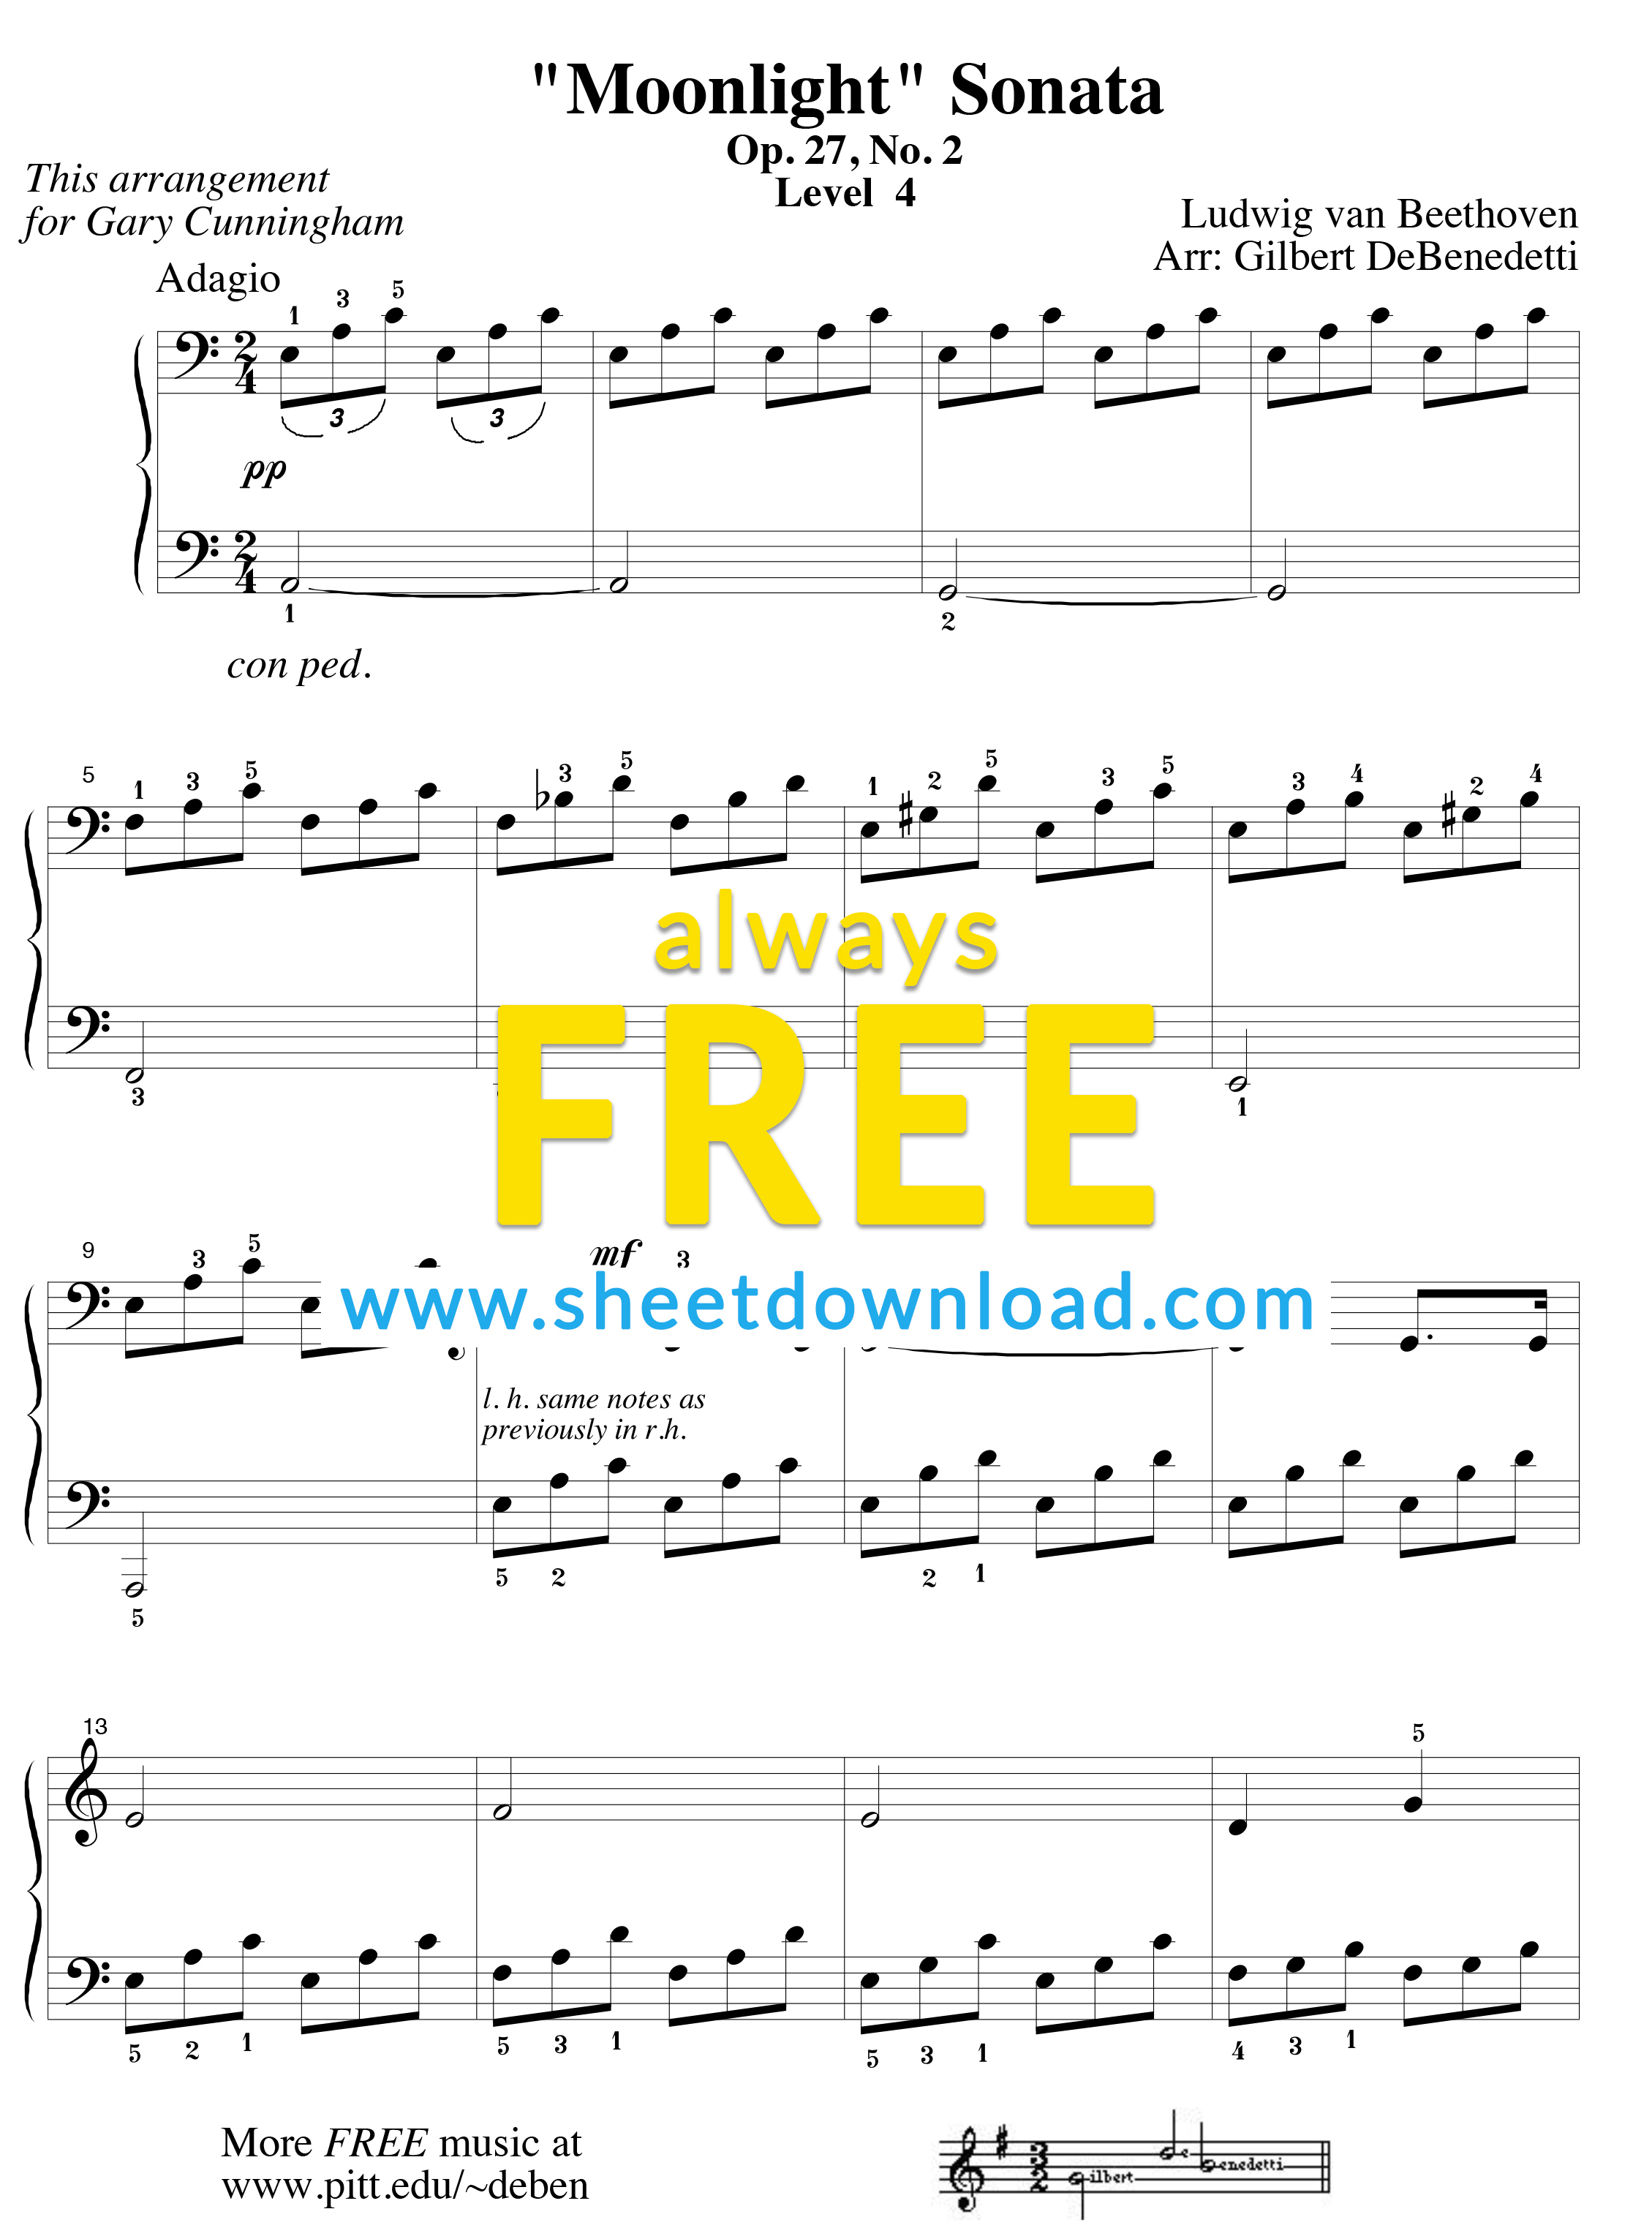 Top 100 Popular Piano Sheets Downloaded From Sheetdownload - Free Piano Sheet Music Online Printable Popular Songs